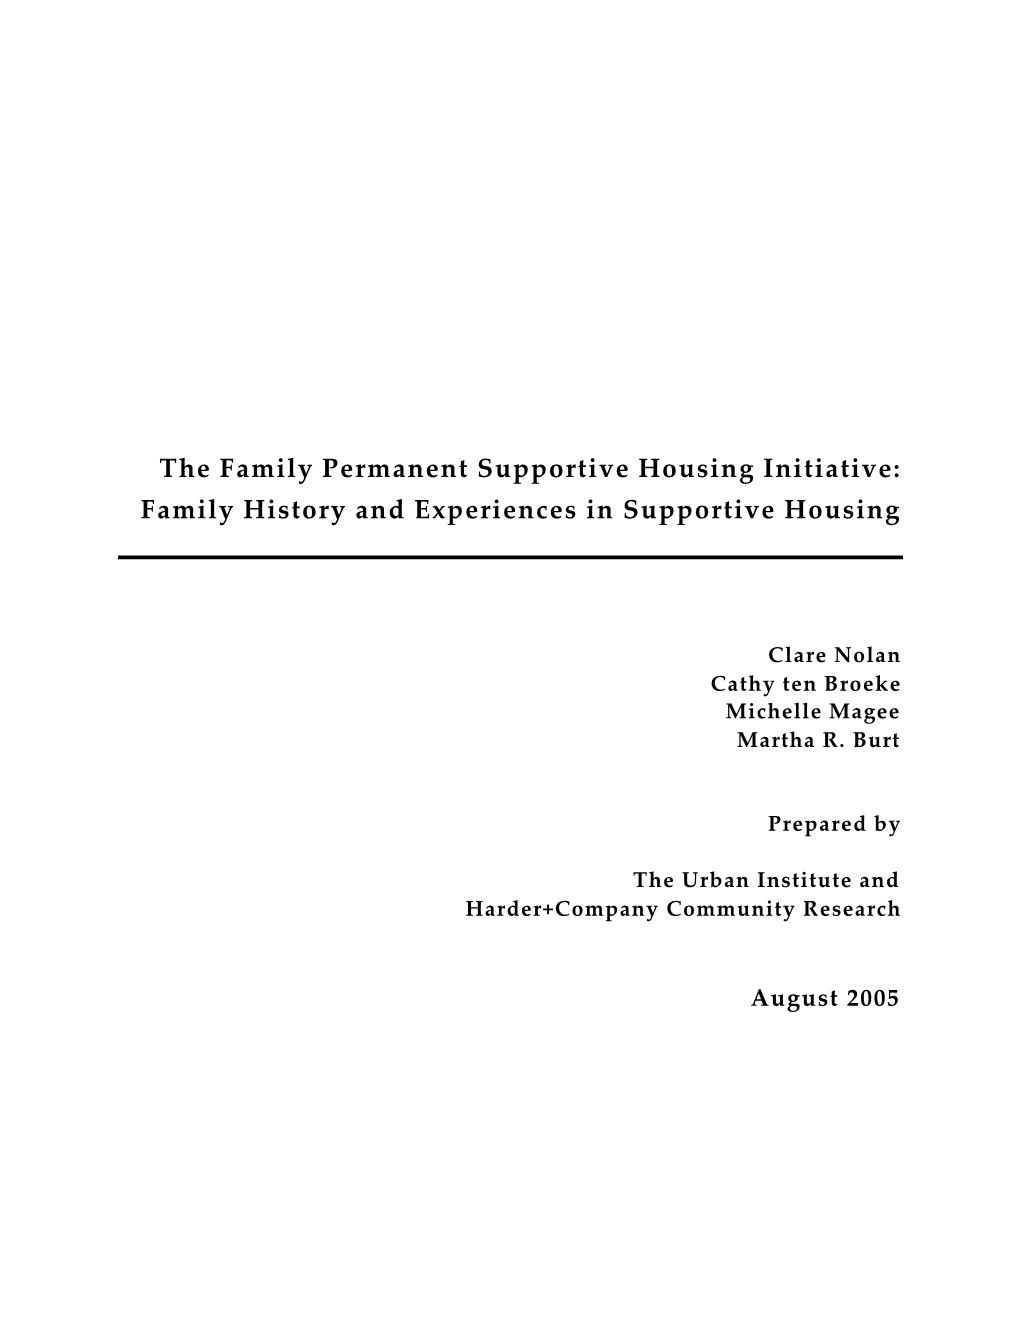 The Family Permanent Supportive Housing Initiative: Family History and Experiences in Supportive Housing